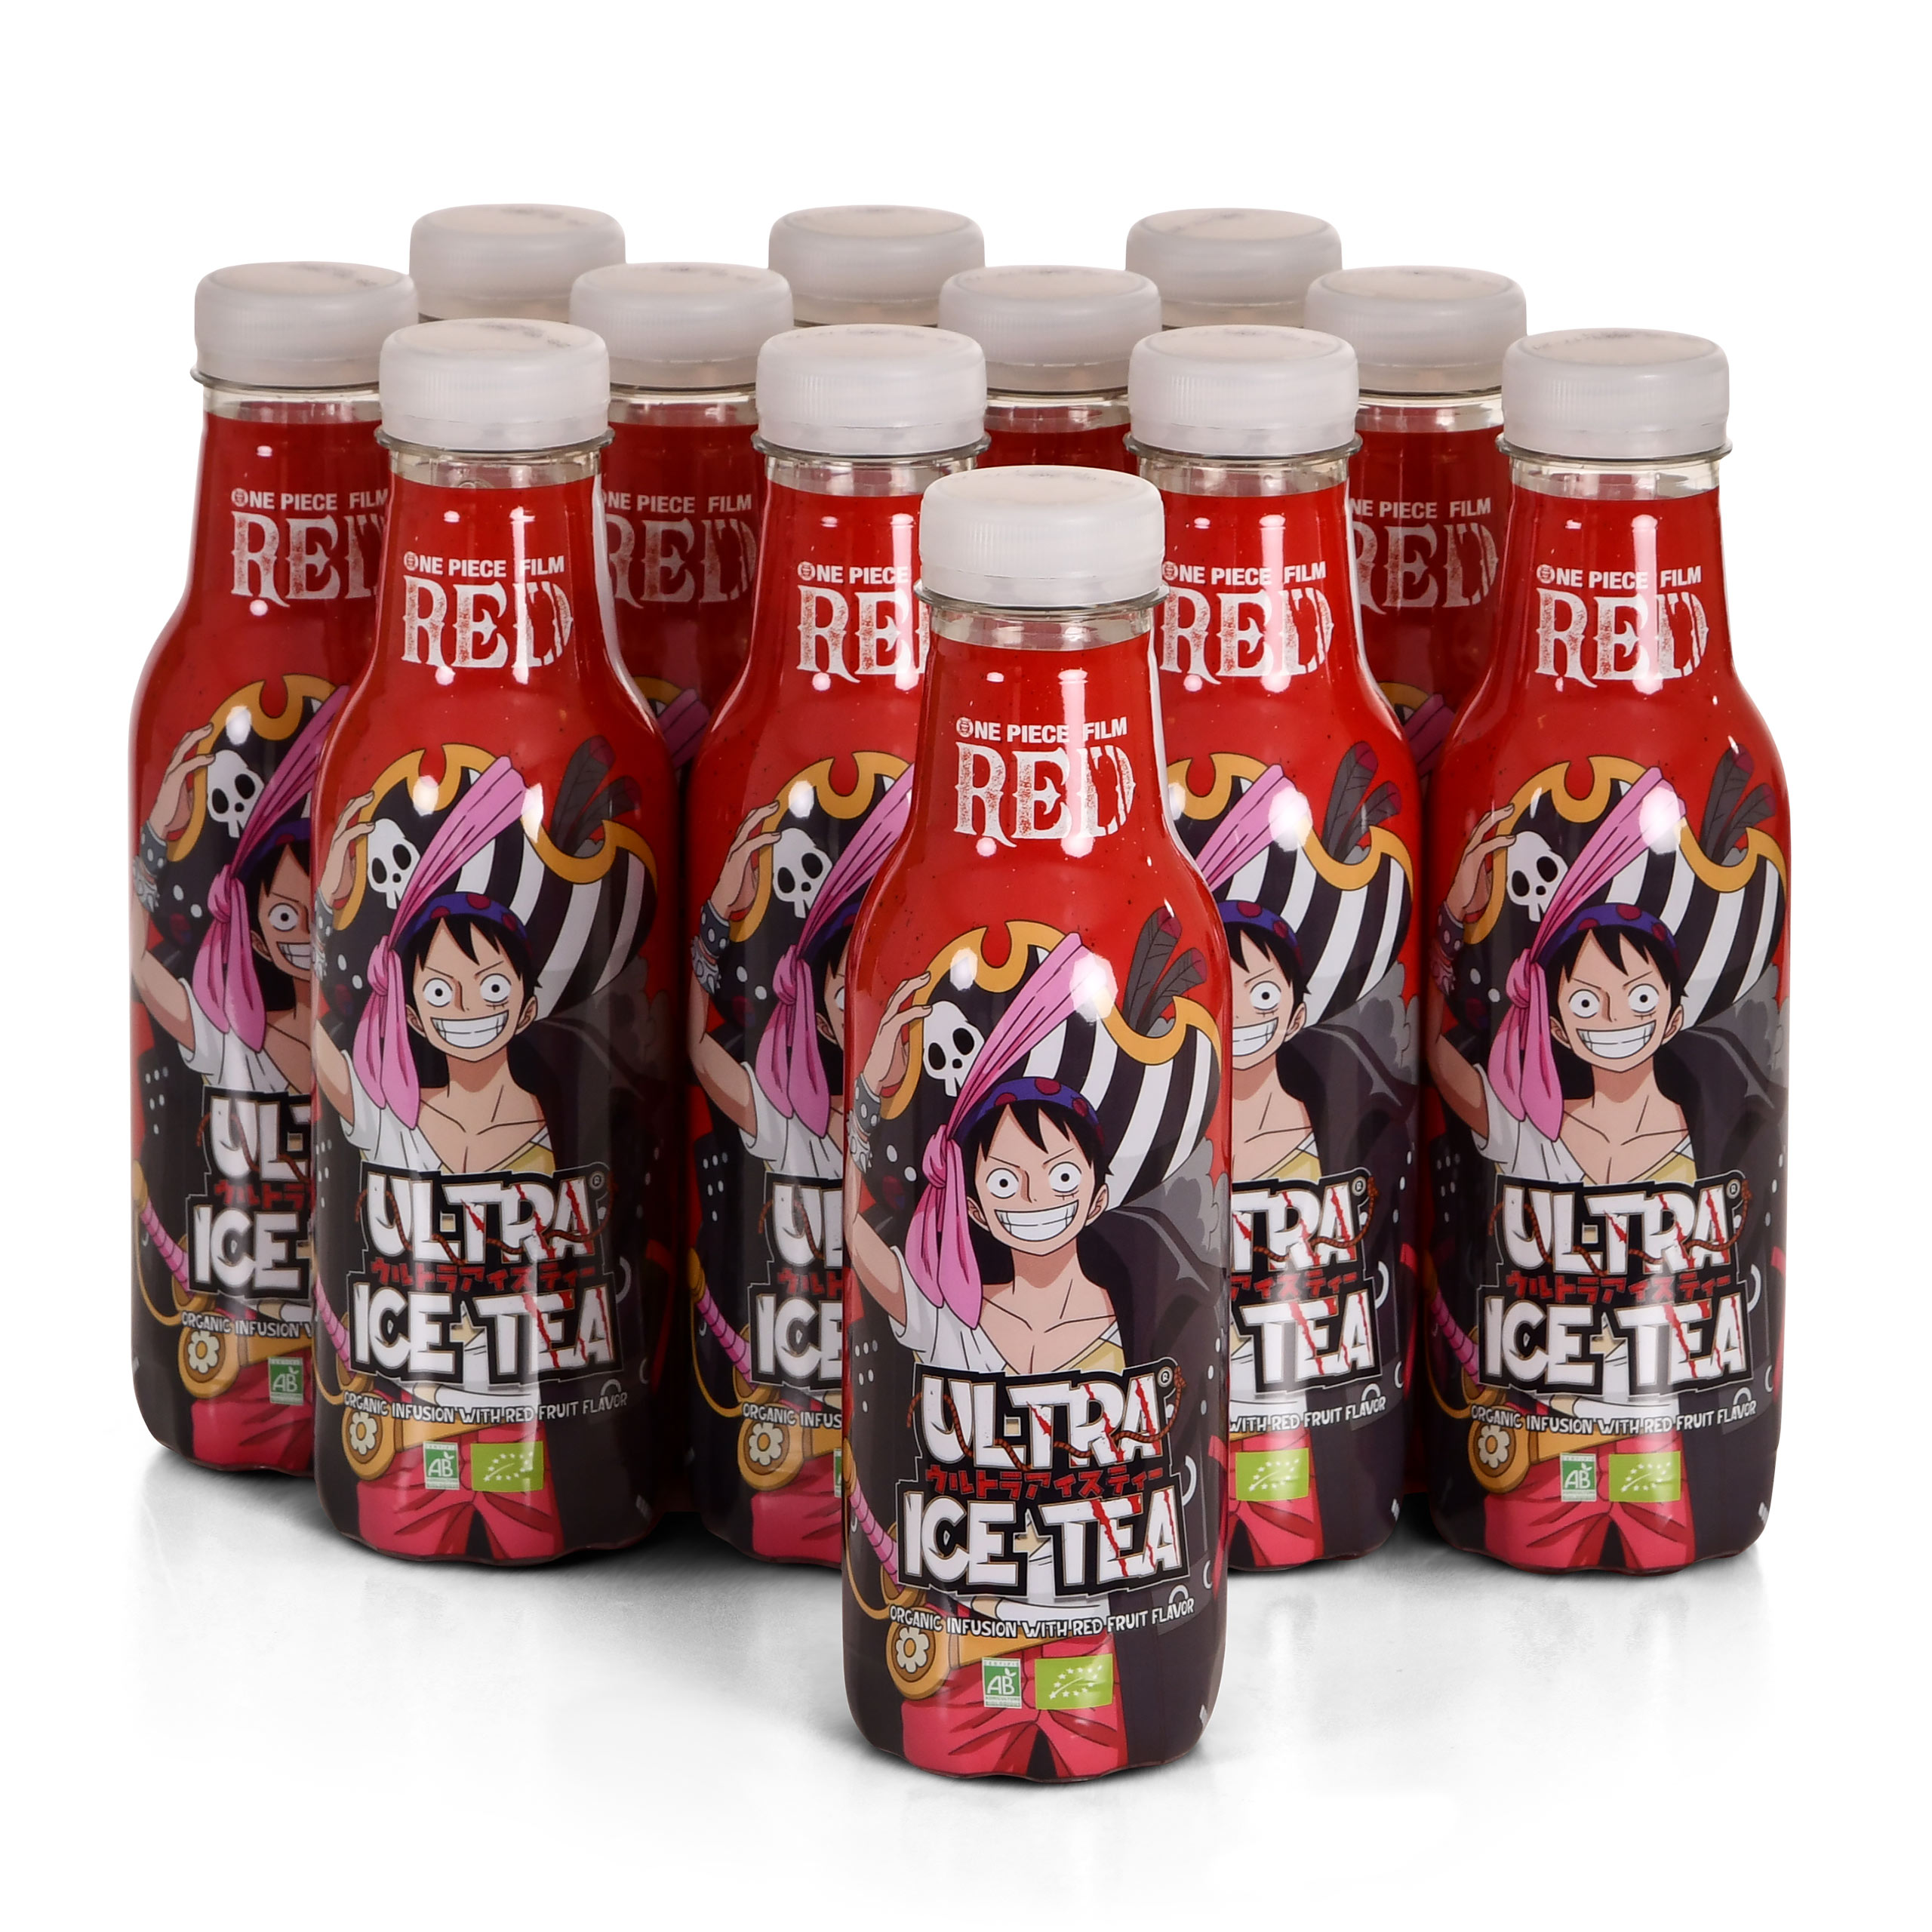 One Piece Red - Ruffy Organic Iced Tea Red Fruits 12 Pack